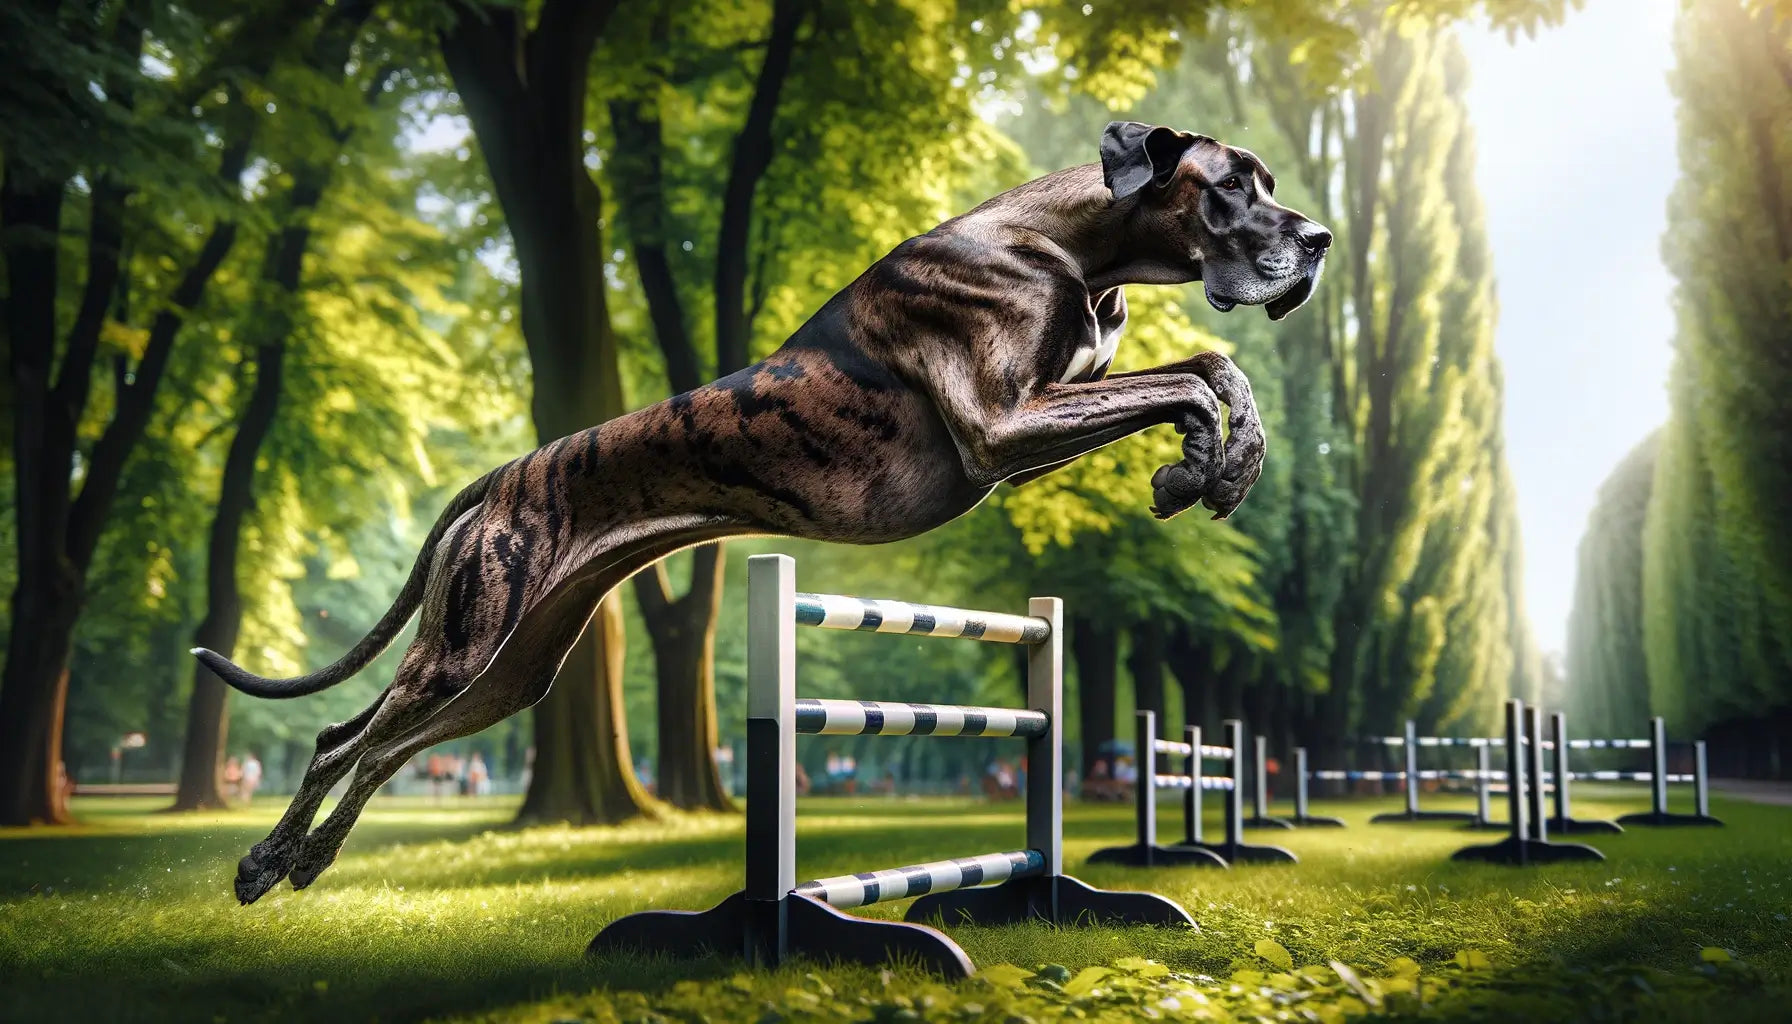 Brindle Great Dane leaping over a hurdle in a park.